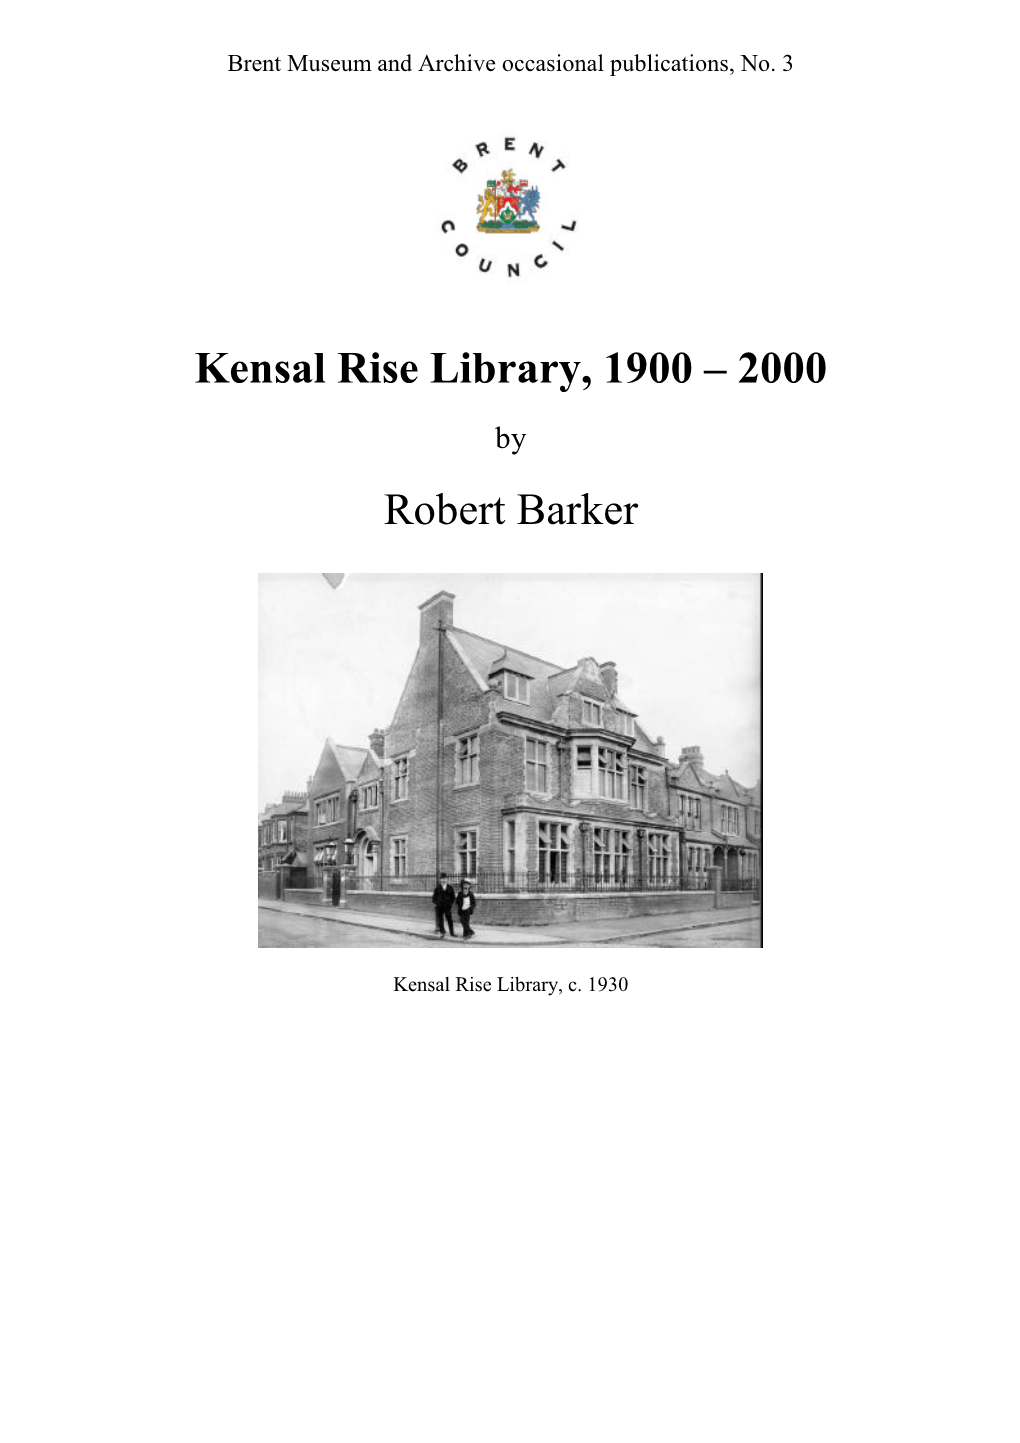 Kensal Rise Library, 1900 – 2000